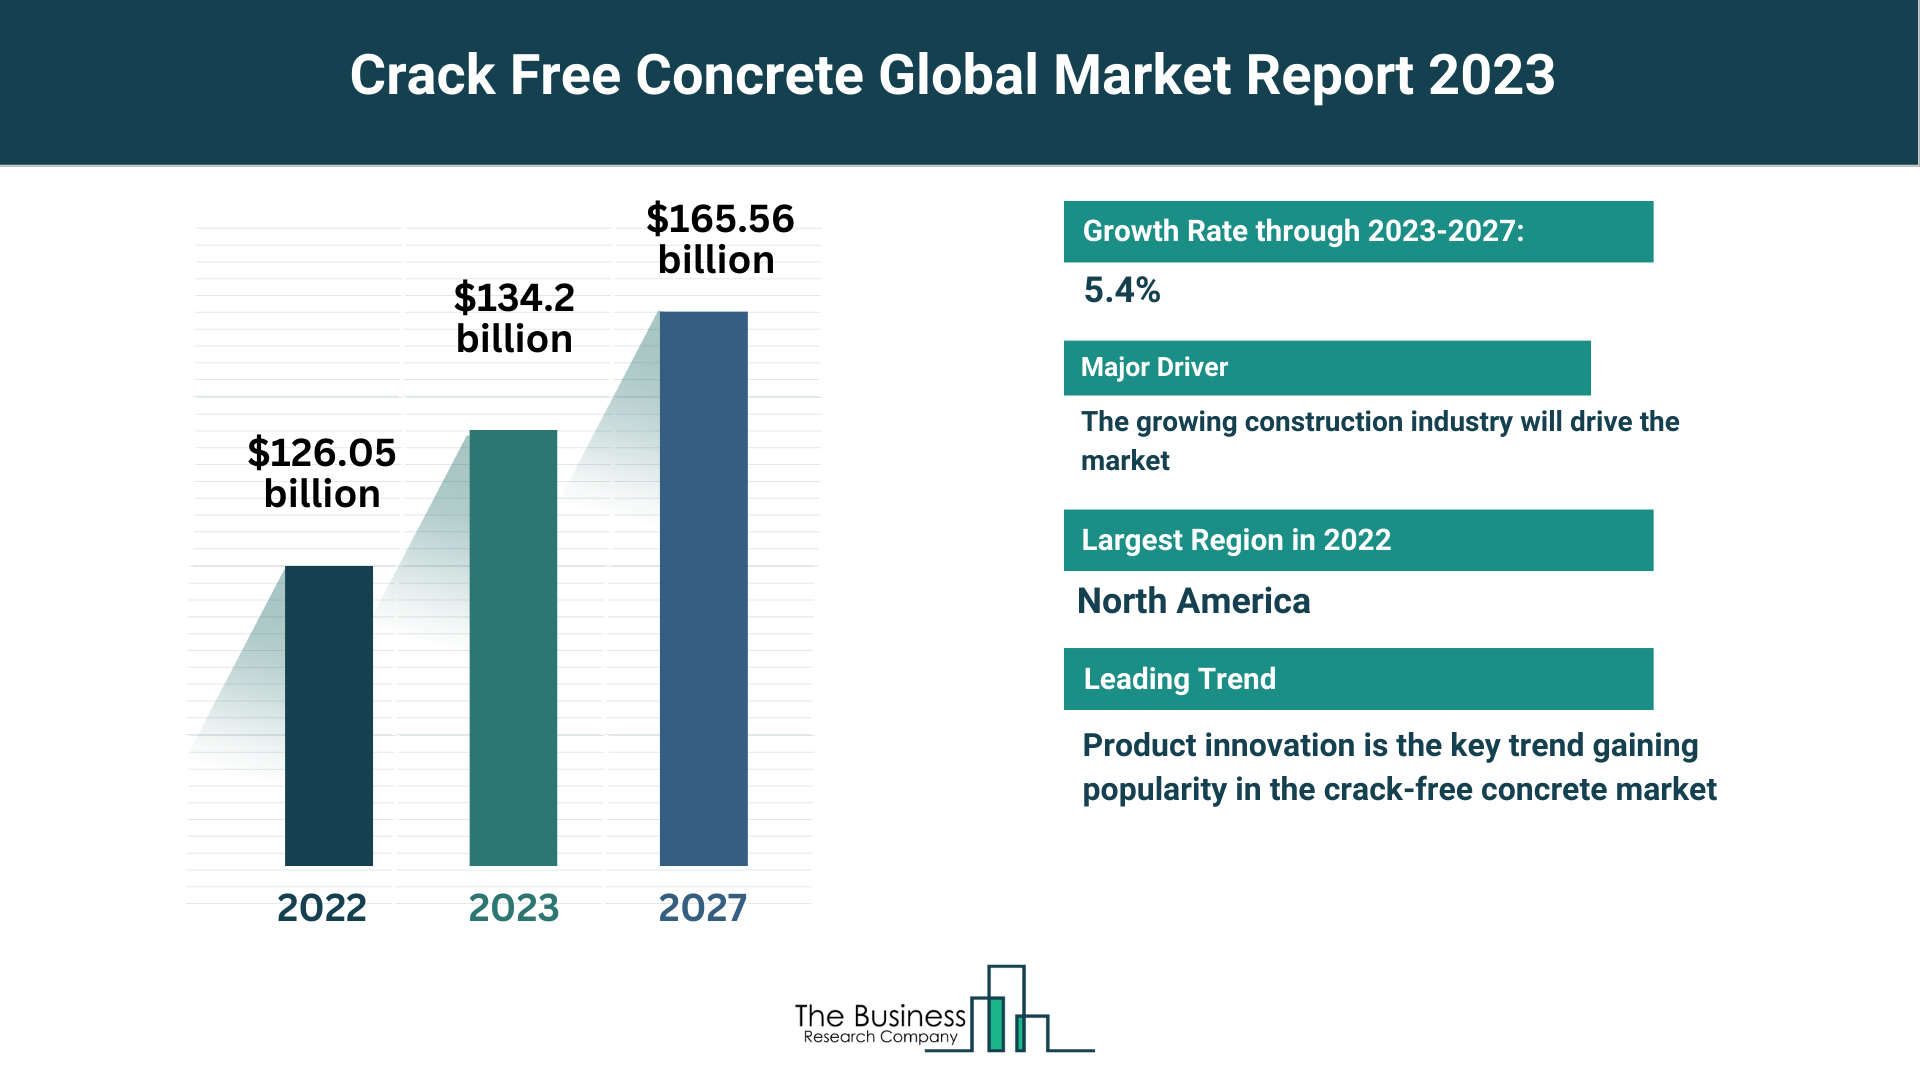 Crack Free Concrete Market Overview: Market Size, Major Drivers And Trends